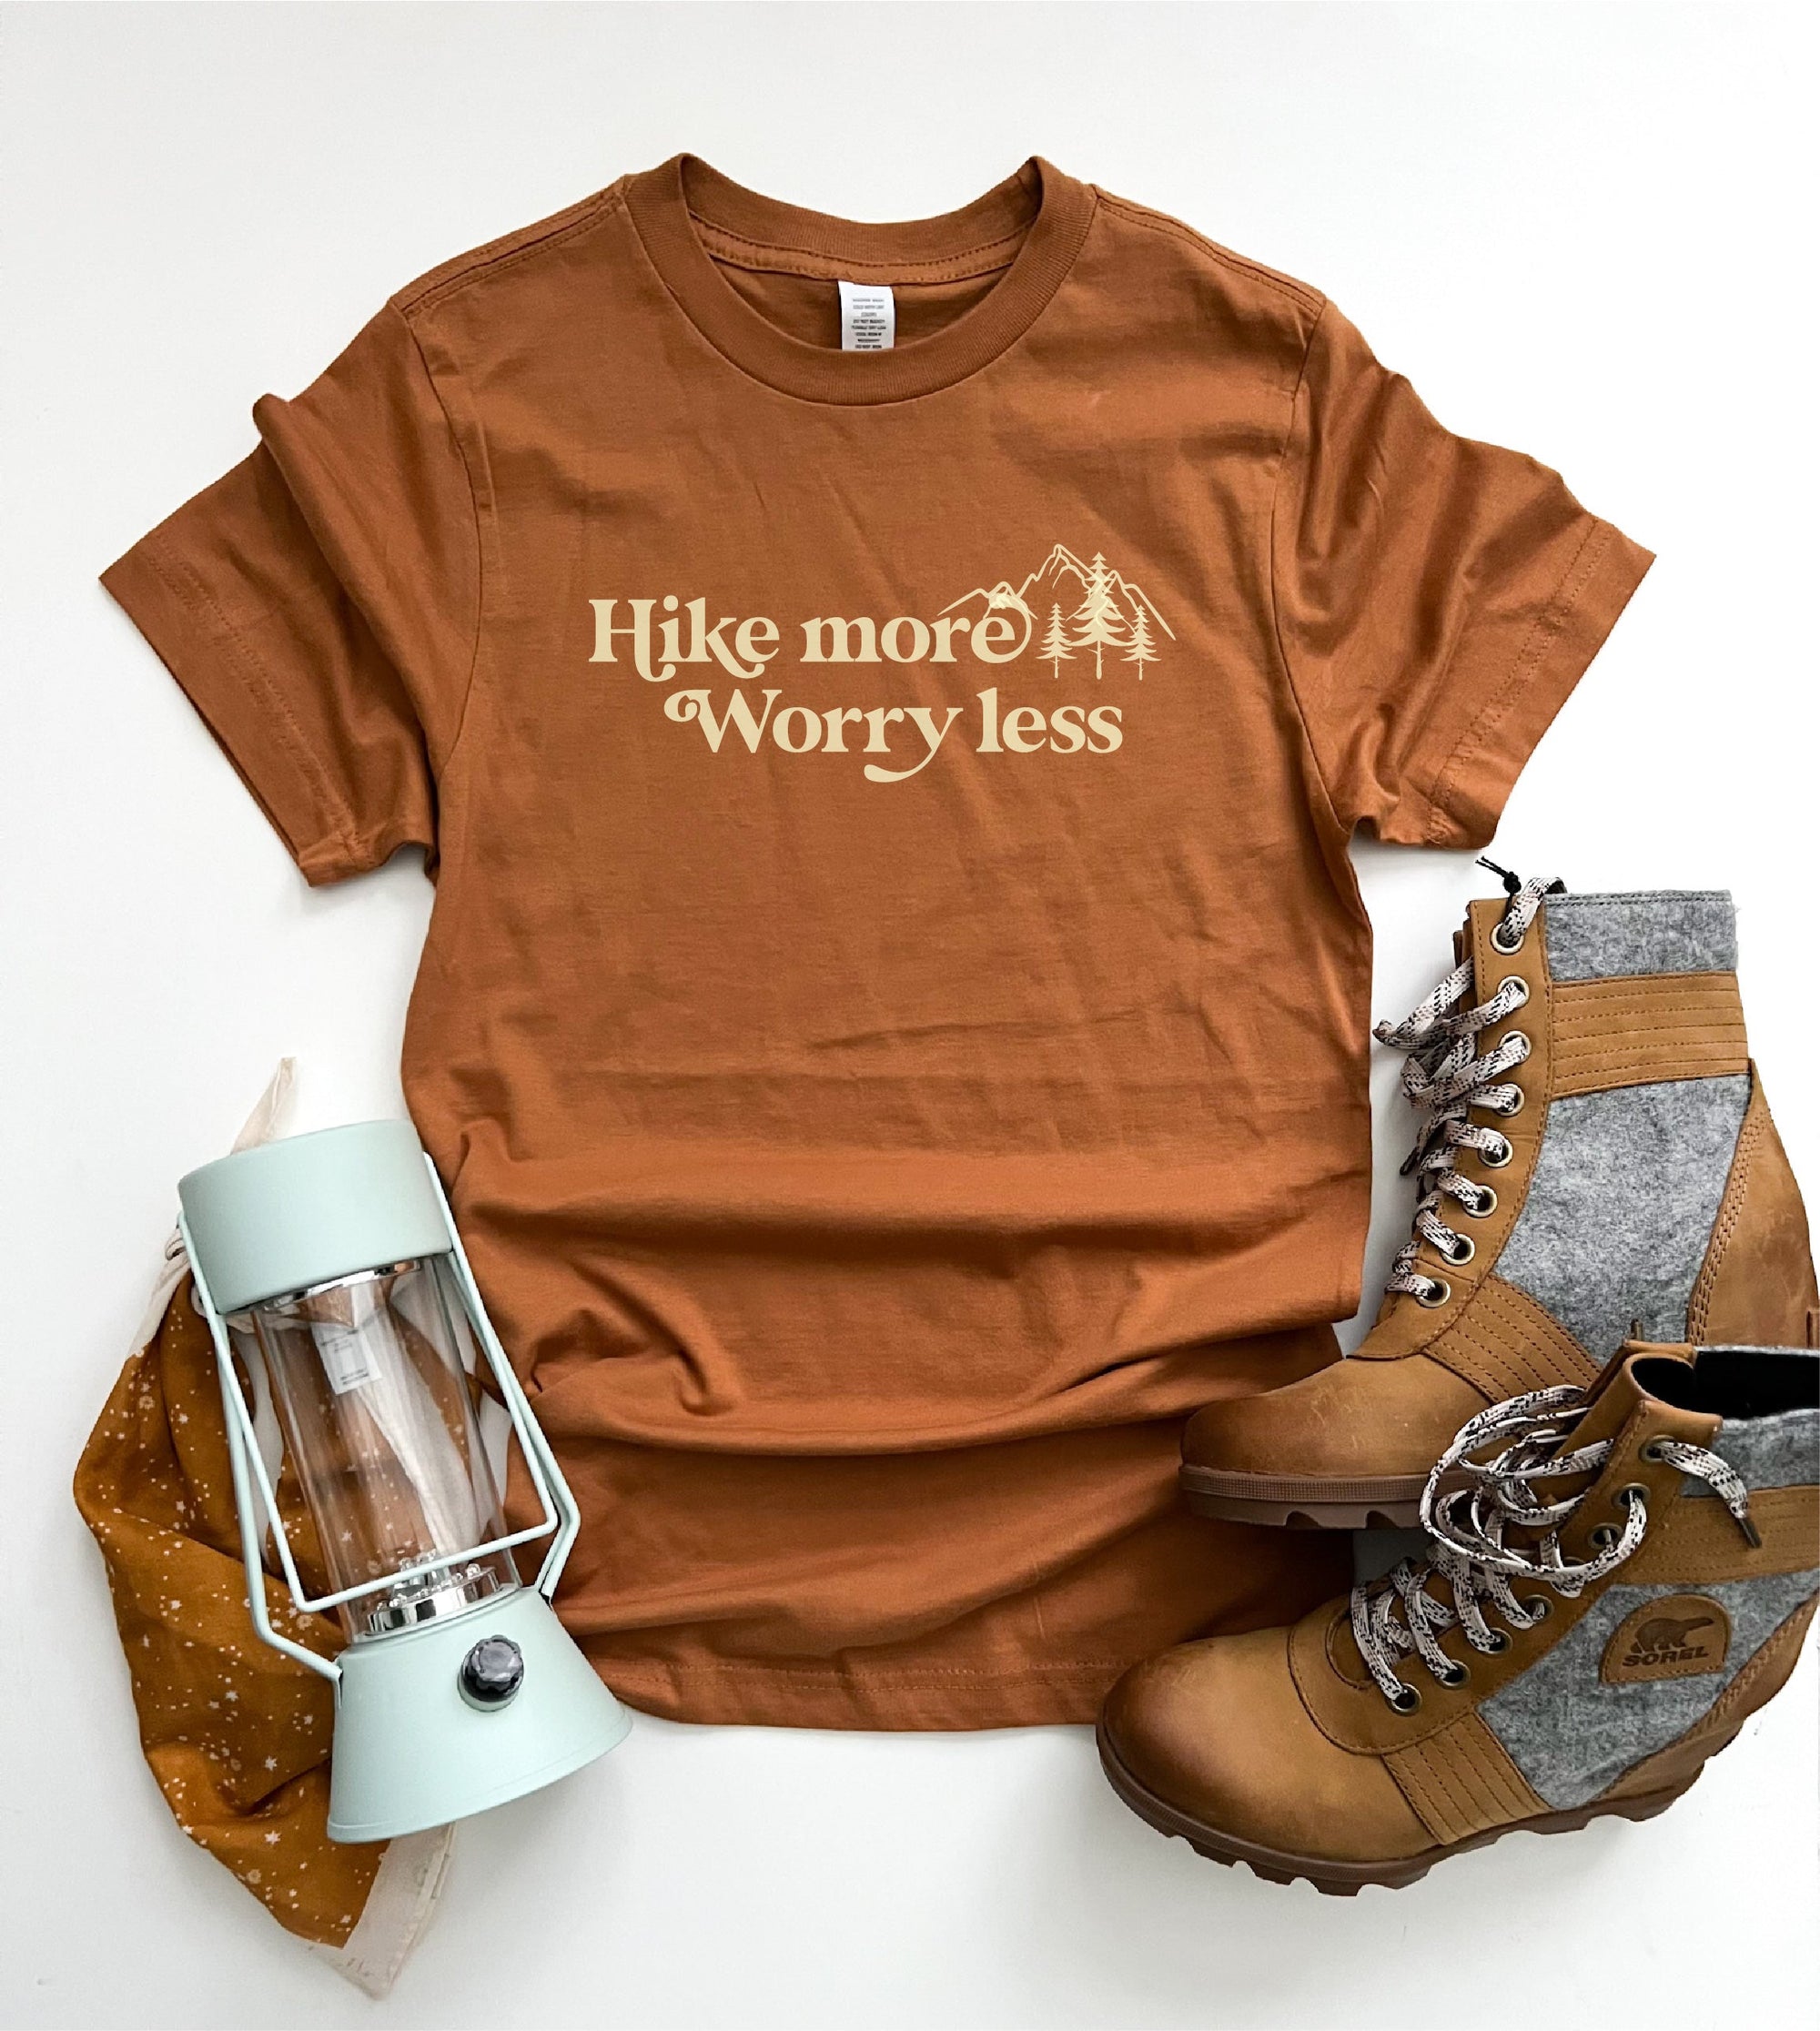 Hike more worry less tee Short sleeve travel tee Bella Canvas 3001 